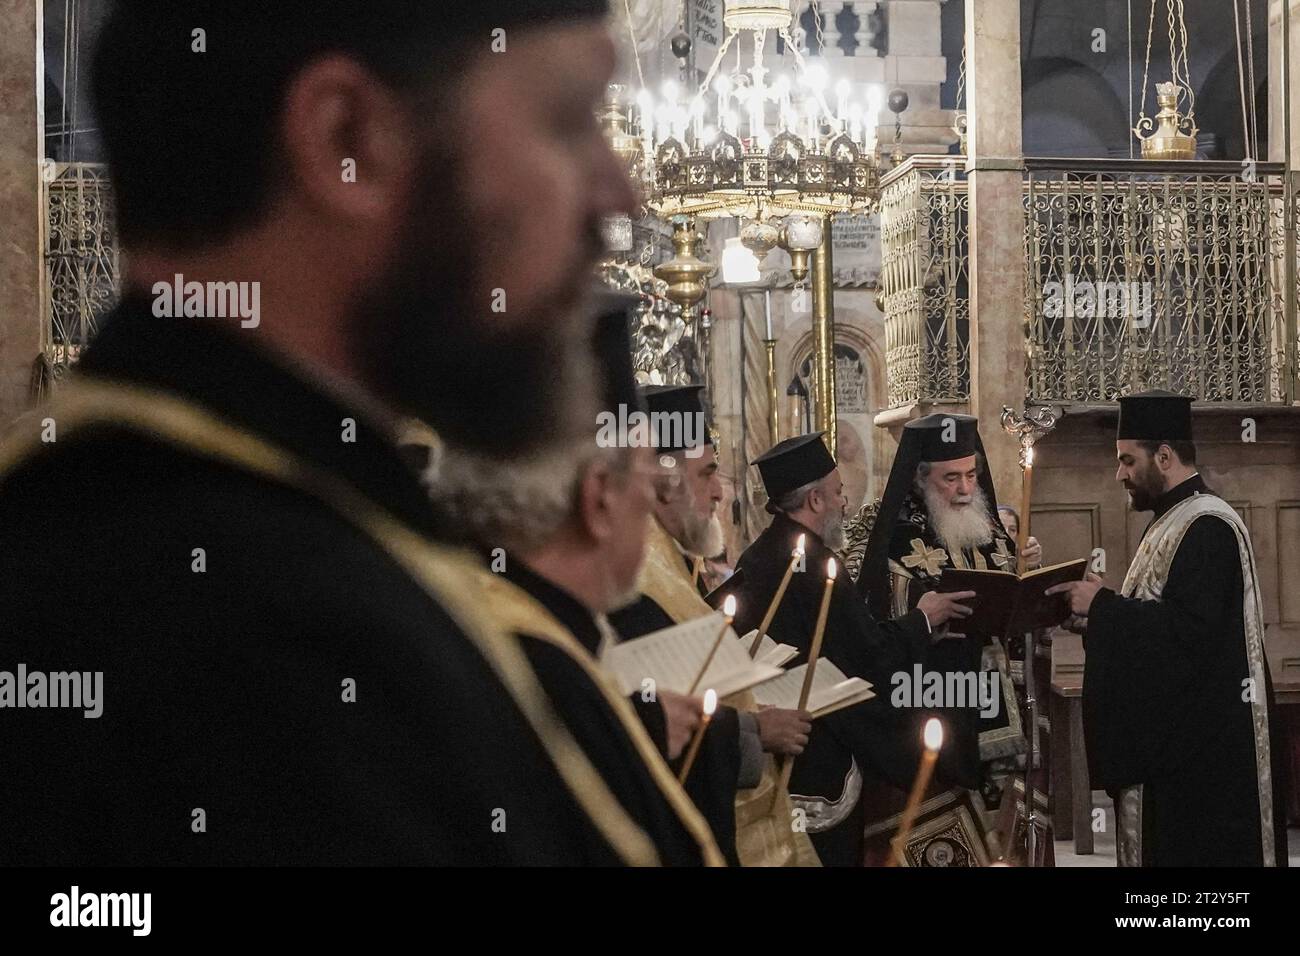 Jerusalem, Israel. 22nd October, 2023. Greek Orthodox Patriarch of Jerusalem, THEOPHILOS III, leads the Jerusalem community in a memorial service in the katholikon or catholicon at the Church of the Holy Sepulchre for those killed in the Gaza Strip and hit in the Israeli airstrike on St. Porphyrius Greek Orthodox Church campus in Gaza City on 19th October, 2023. Dozens of displaced Gazans were sheltering at the compound and some were killed. Israel is engaged in a war with Hamas of the Gaza Strip following massive rocket fire from the Gaza Strip into Israel, infiltration of gunmen into Israeli Stock Photo